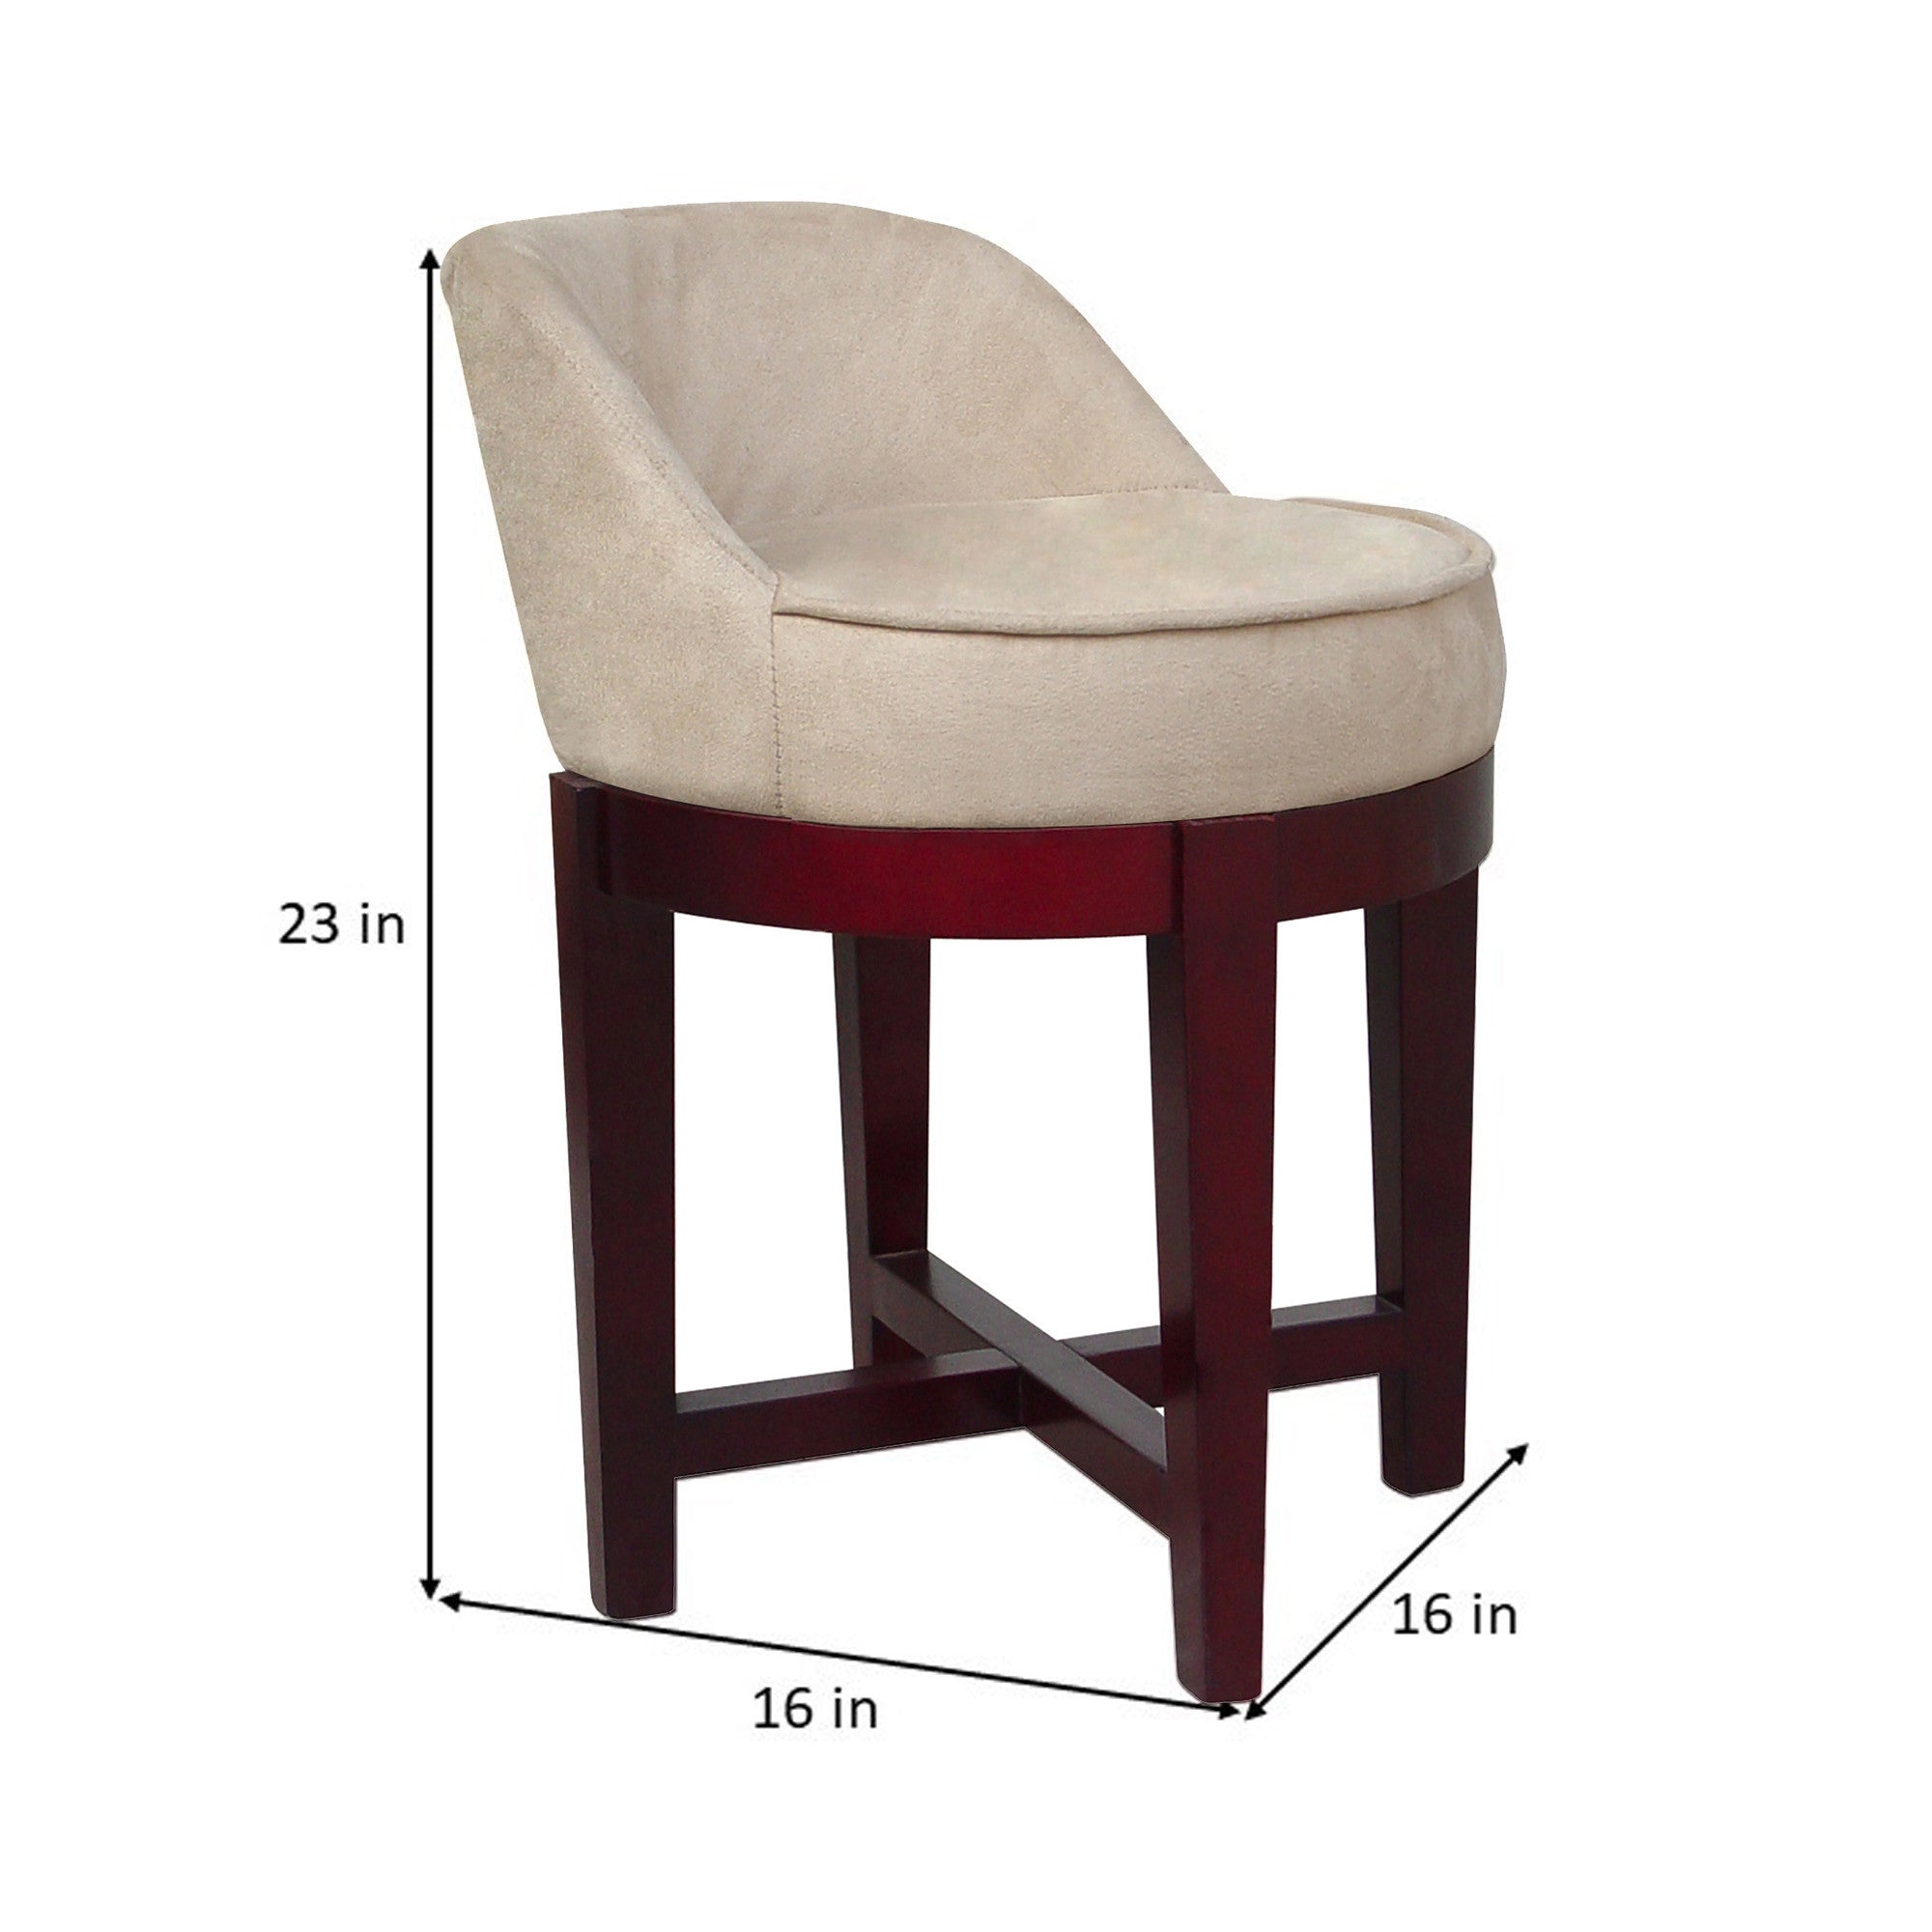 Teamson Home Swivel Chair with Solid Wood Legs